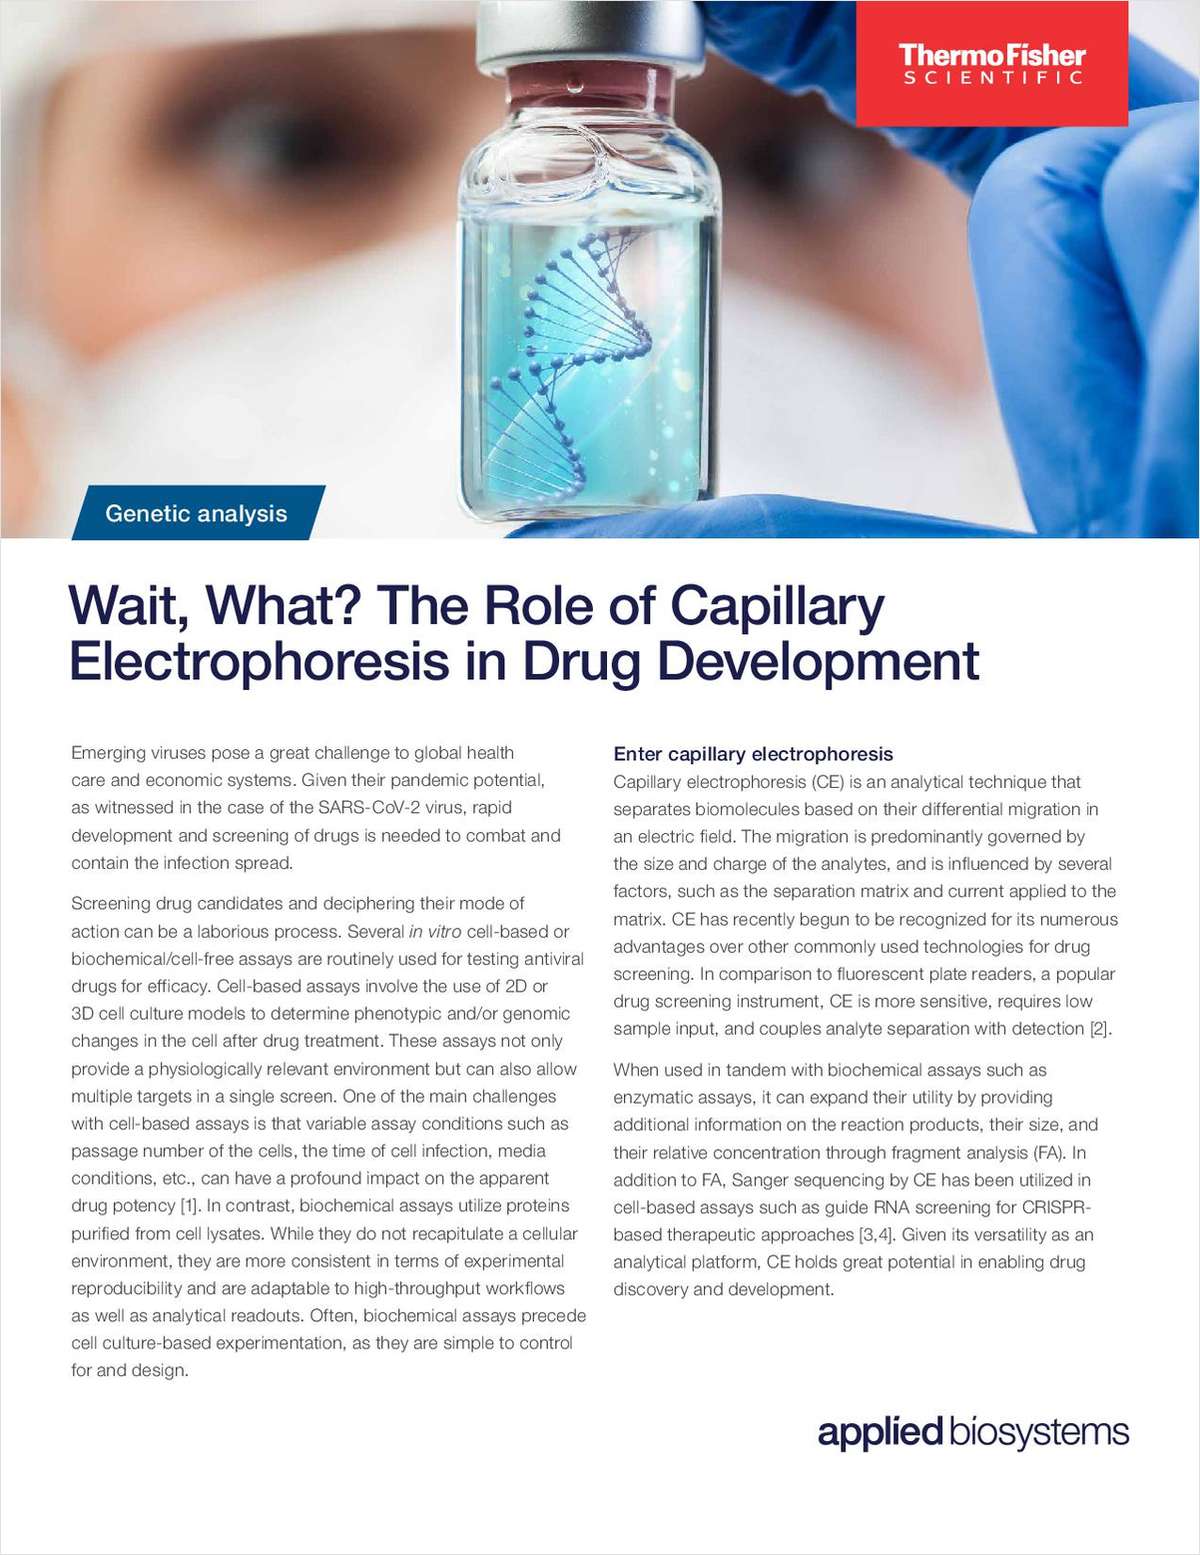 Wait, What? The Role of Capillary Electrophoresis in Drug Development